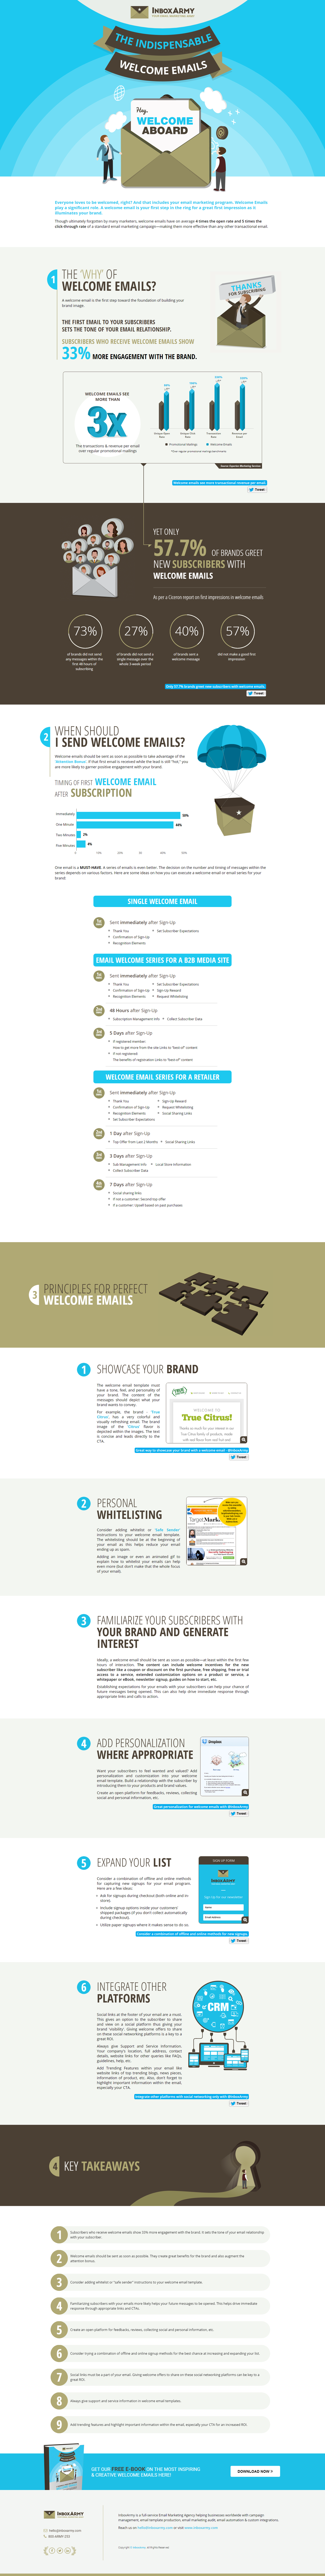 welcome-email-best-practices-Infographic